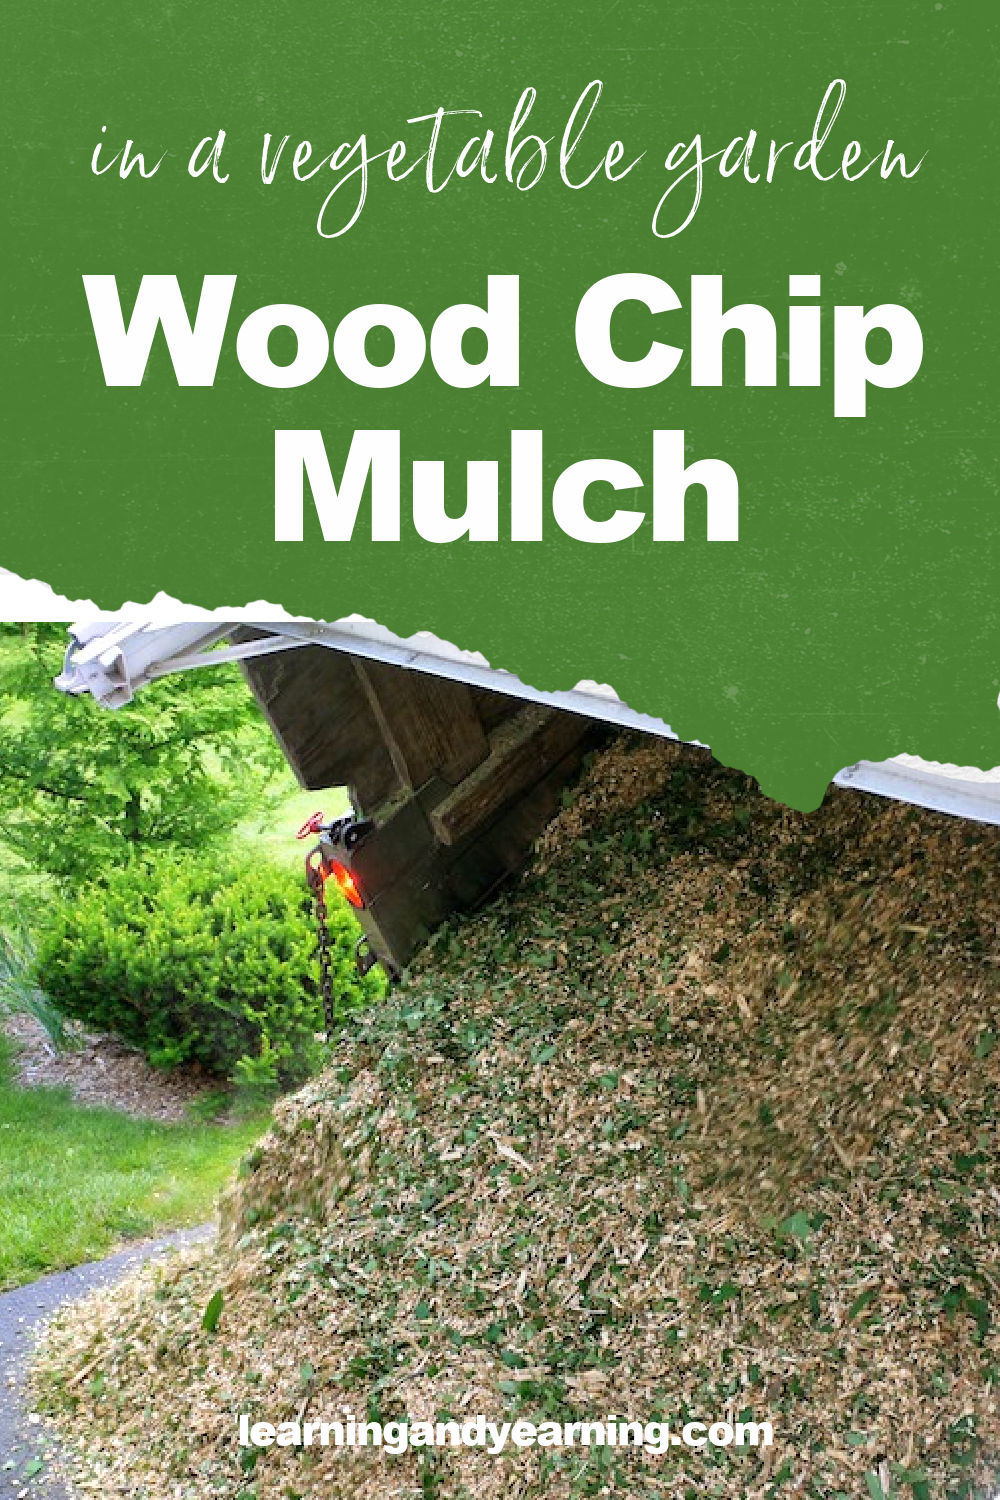 Wood chip mulch - perfect for growing beds to enrich soil, recycle waste